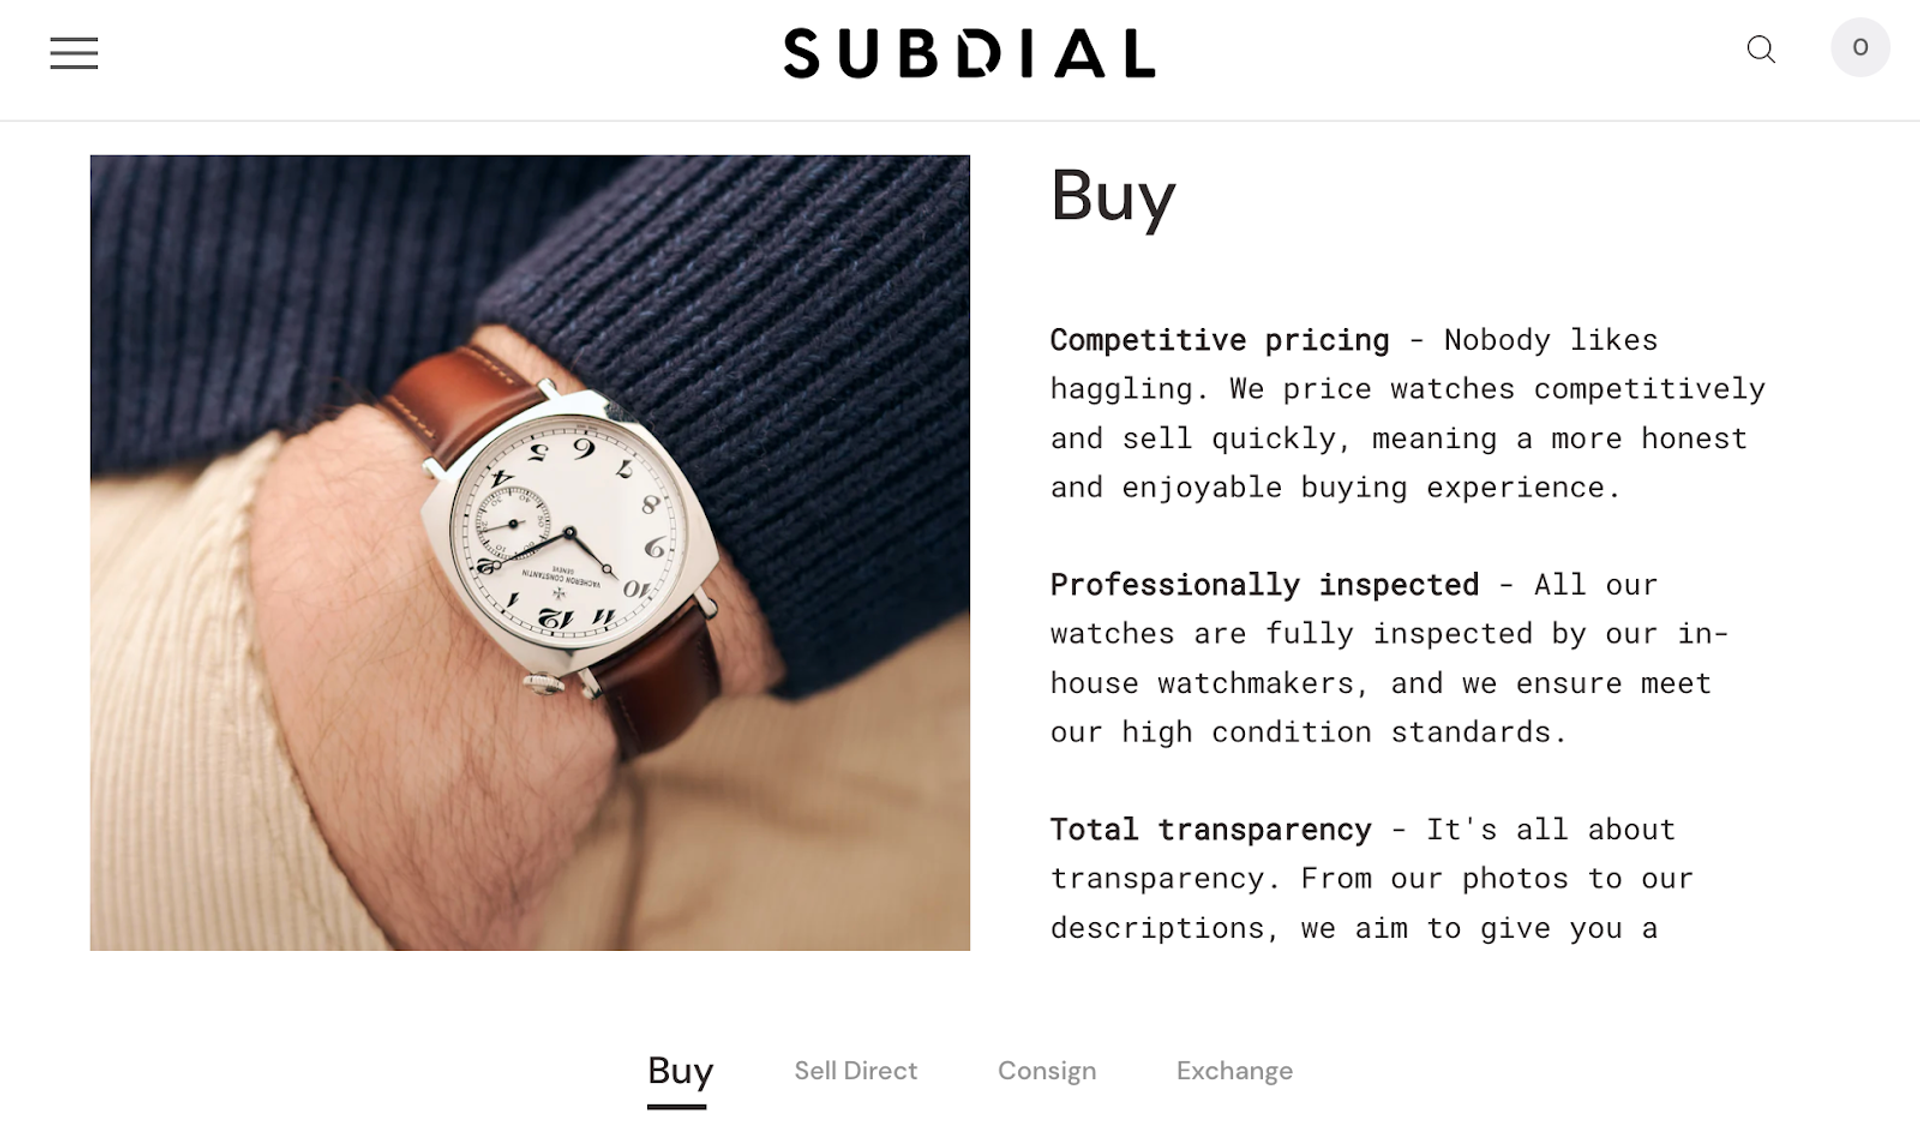 An image of the landing page for the Subdial “About Us” section. It shows some text alongside an image of a man’s wrist with a watch.